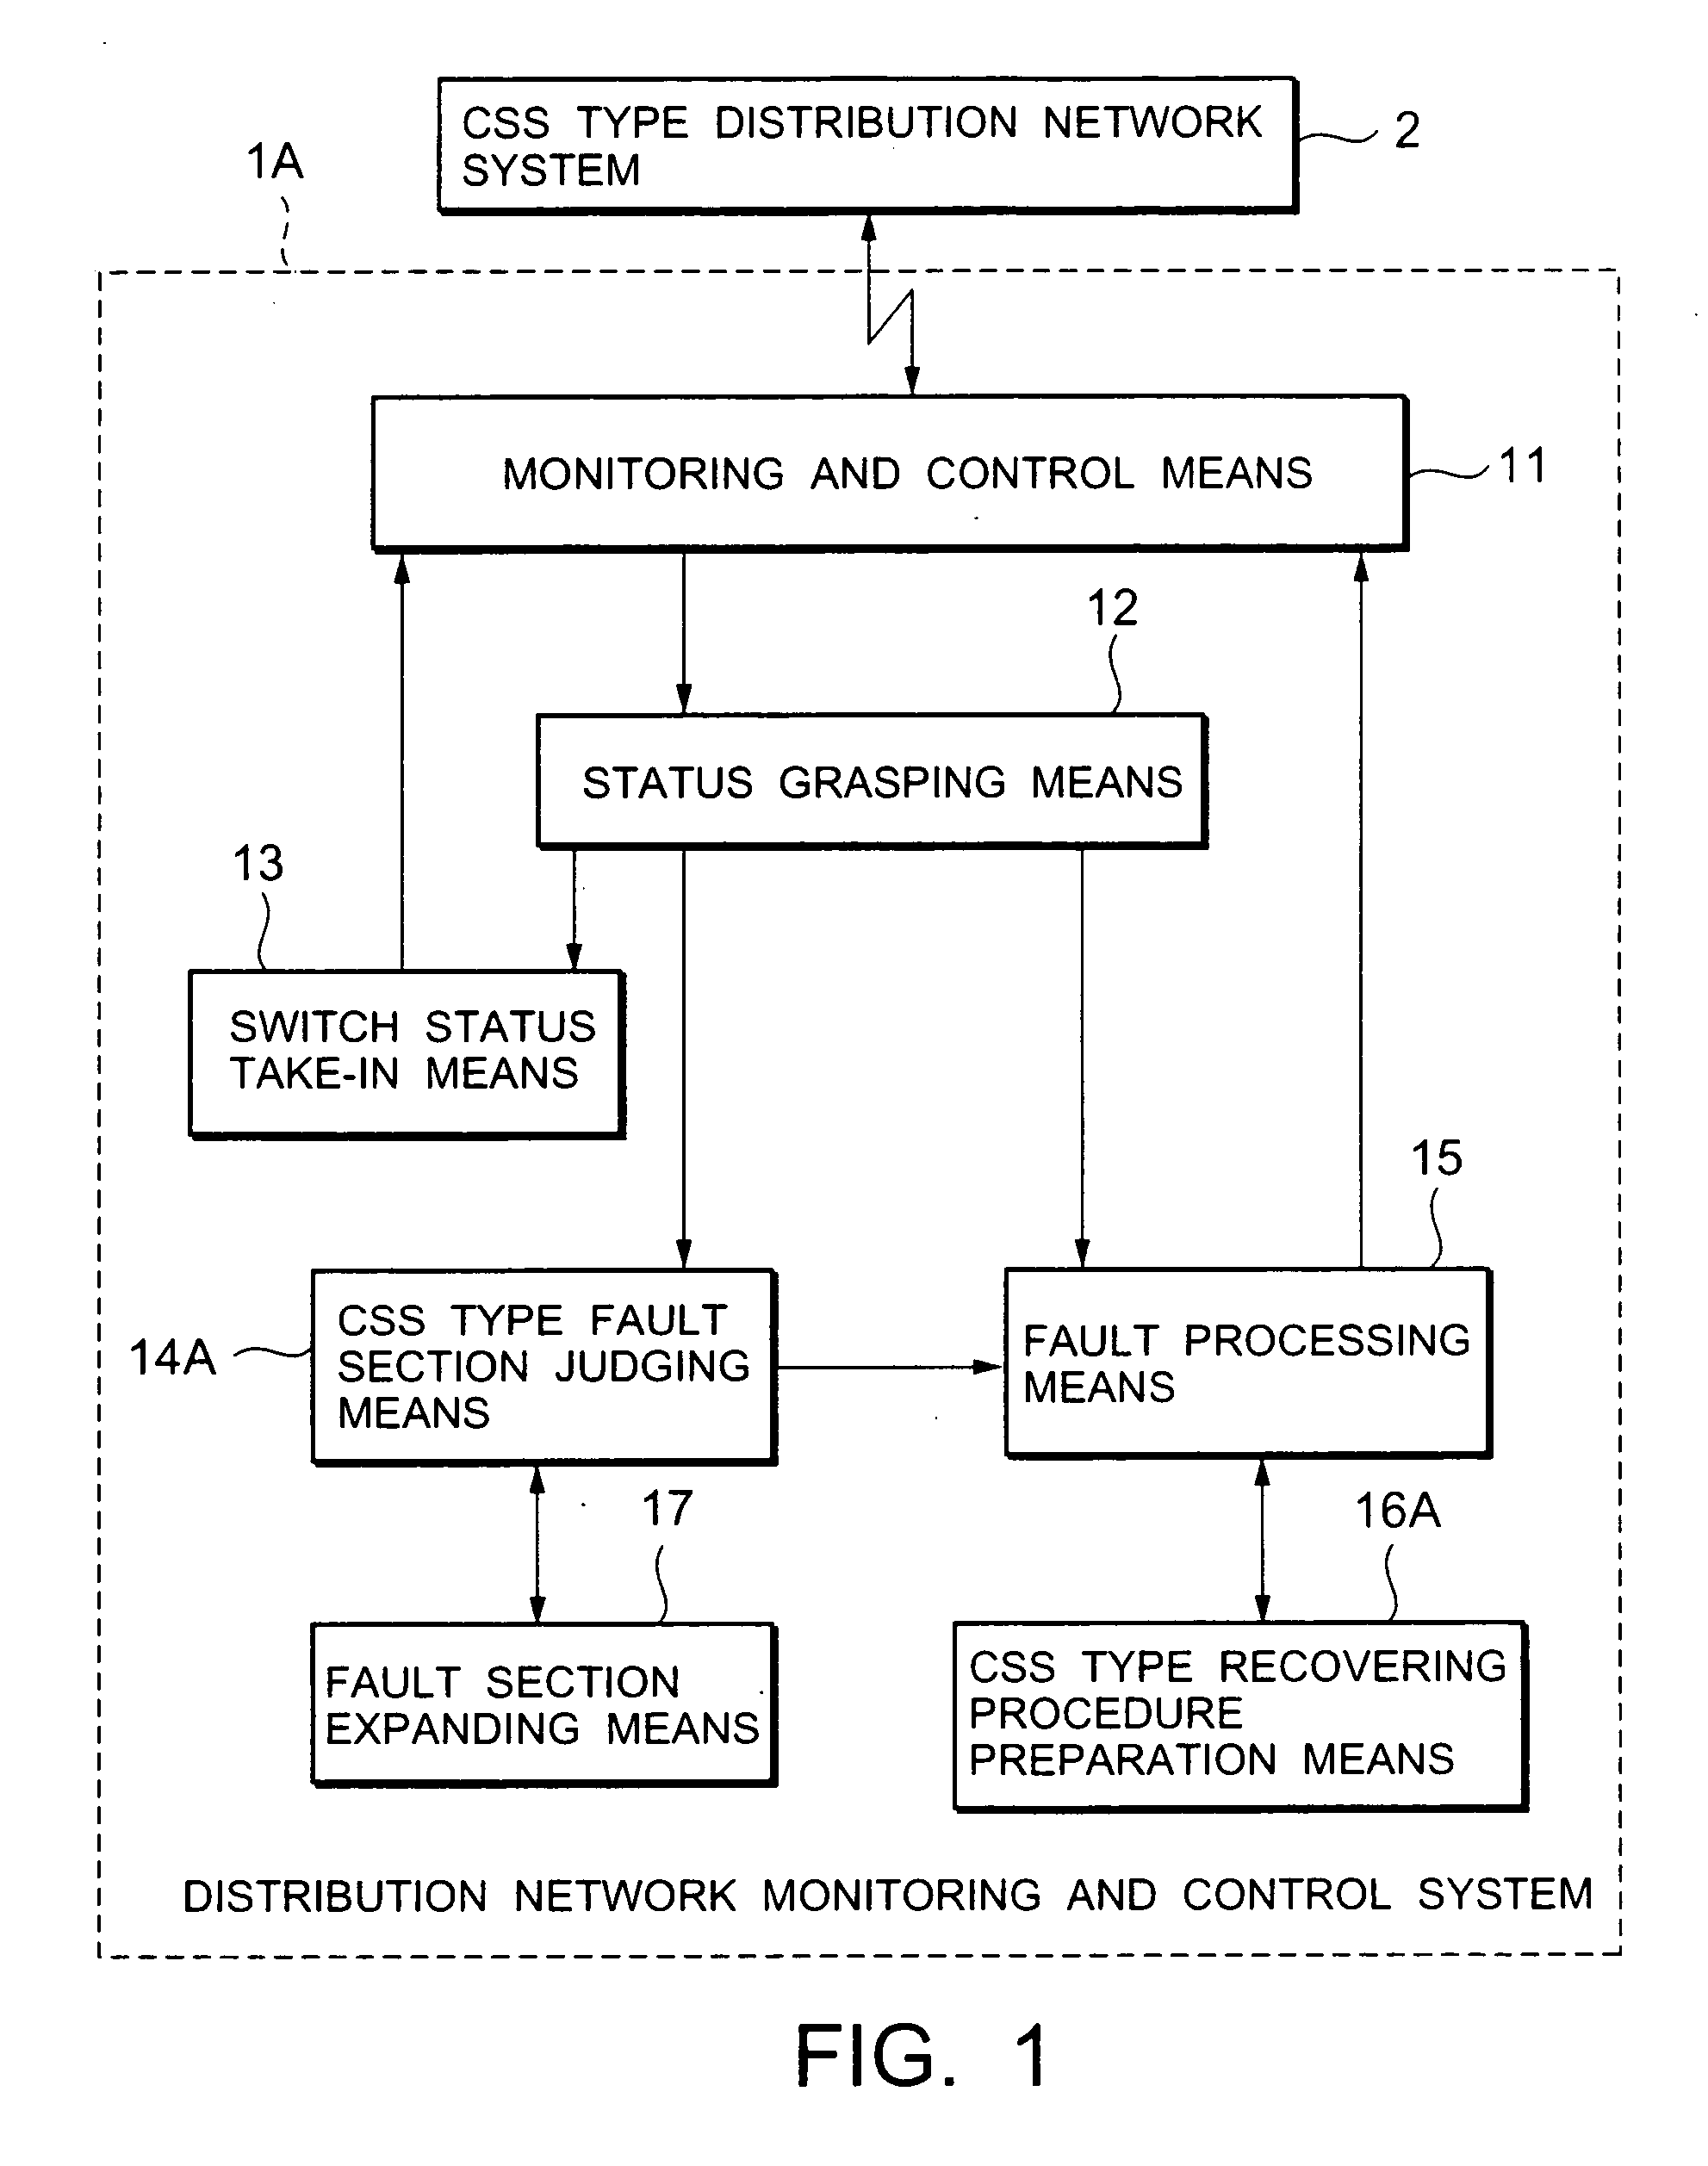 Distribution network monitoring and control system